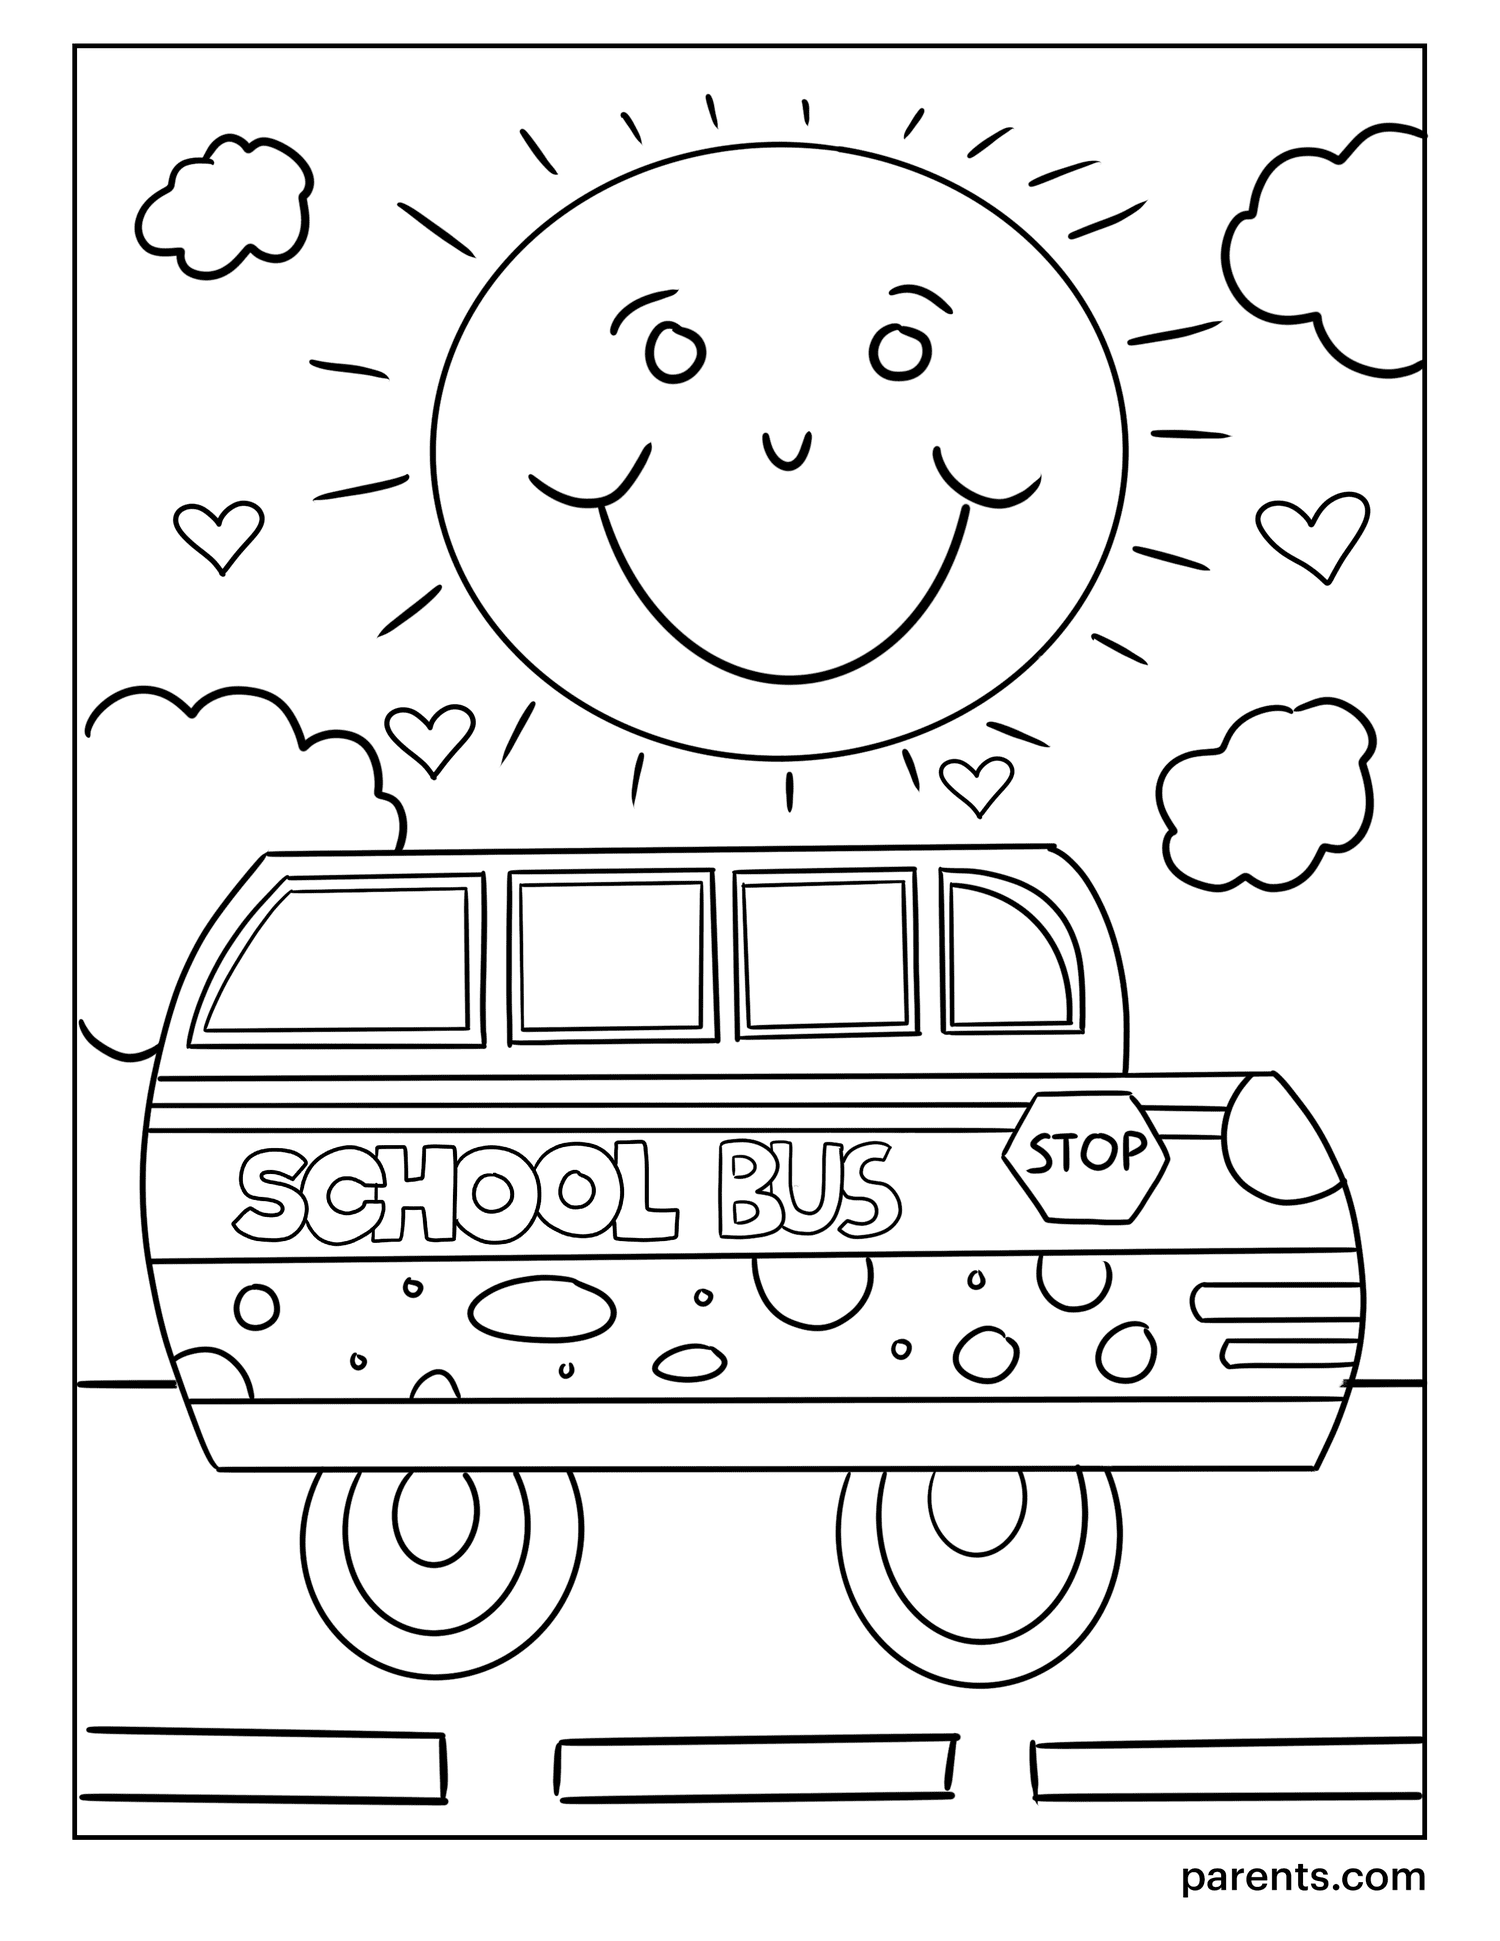 20 Printable Back to School Coloring Pages for Kids   Parents